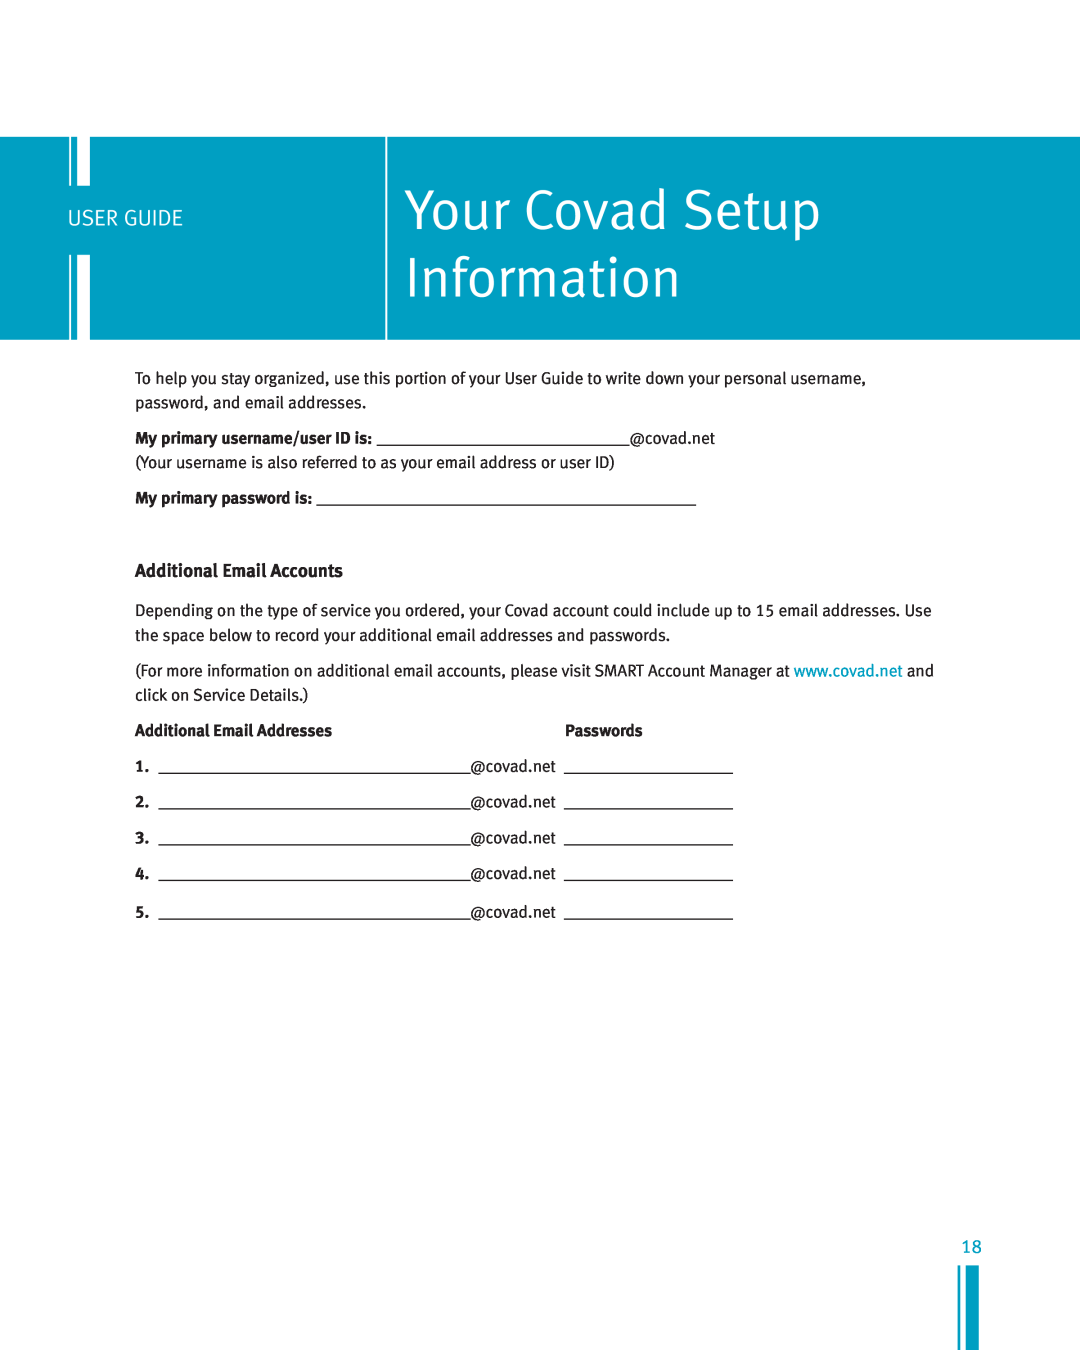 Netopia Network Adapte manual Your Covad Setup Information, Additional Email Accounts, User Guide 